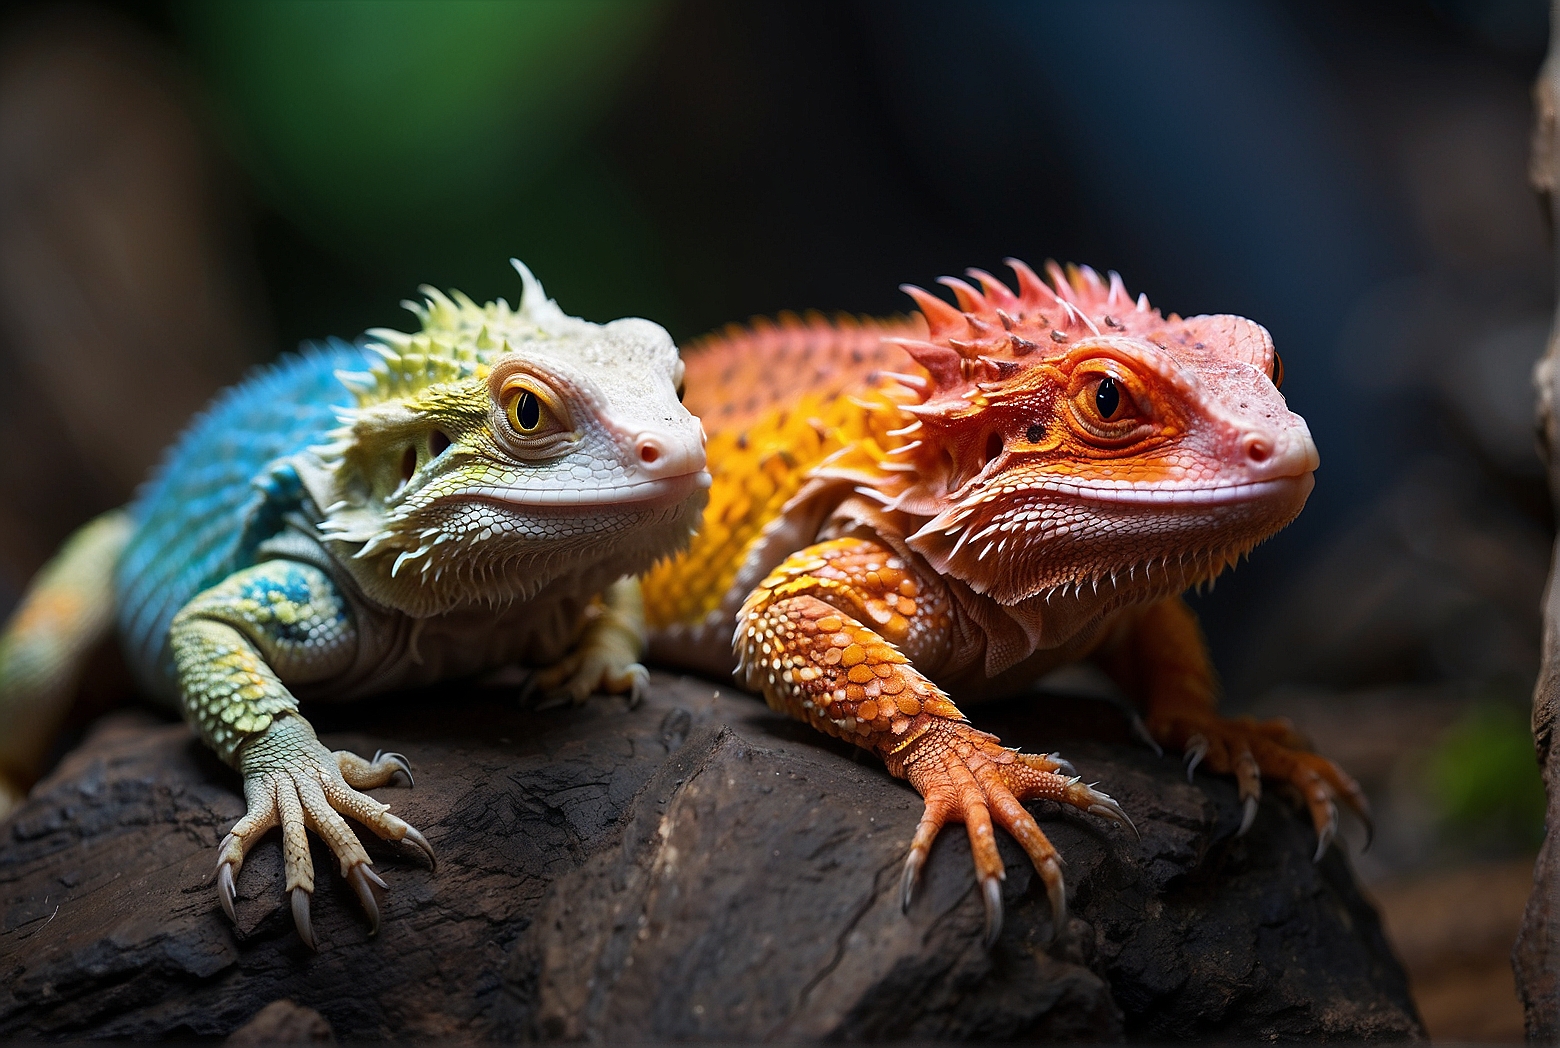 What Do Bearded Dragon Colors Mean?